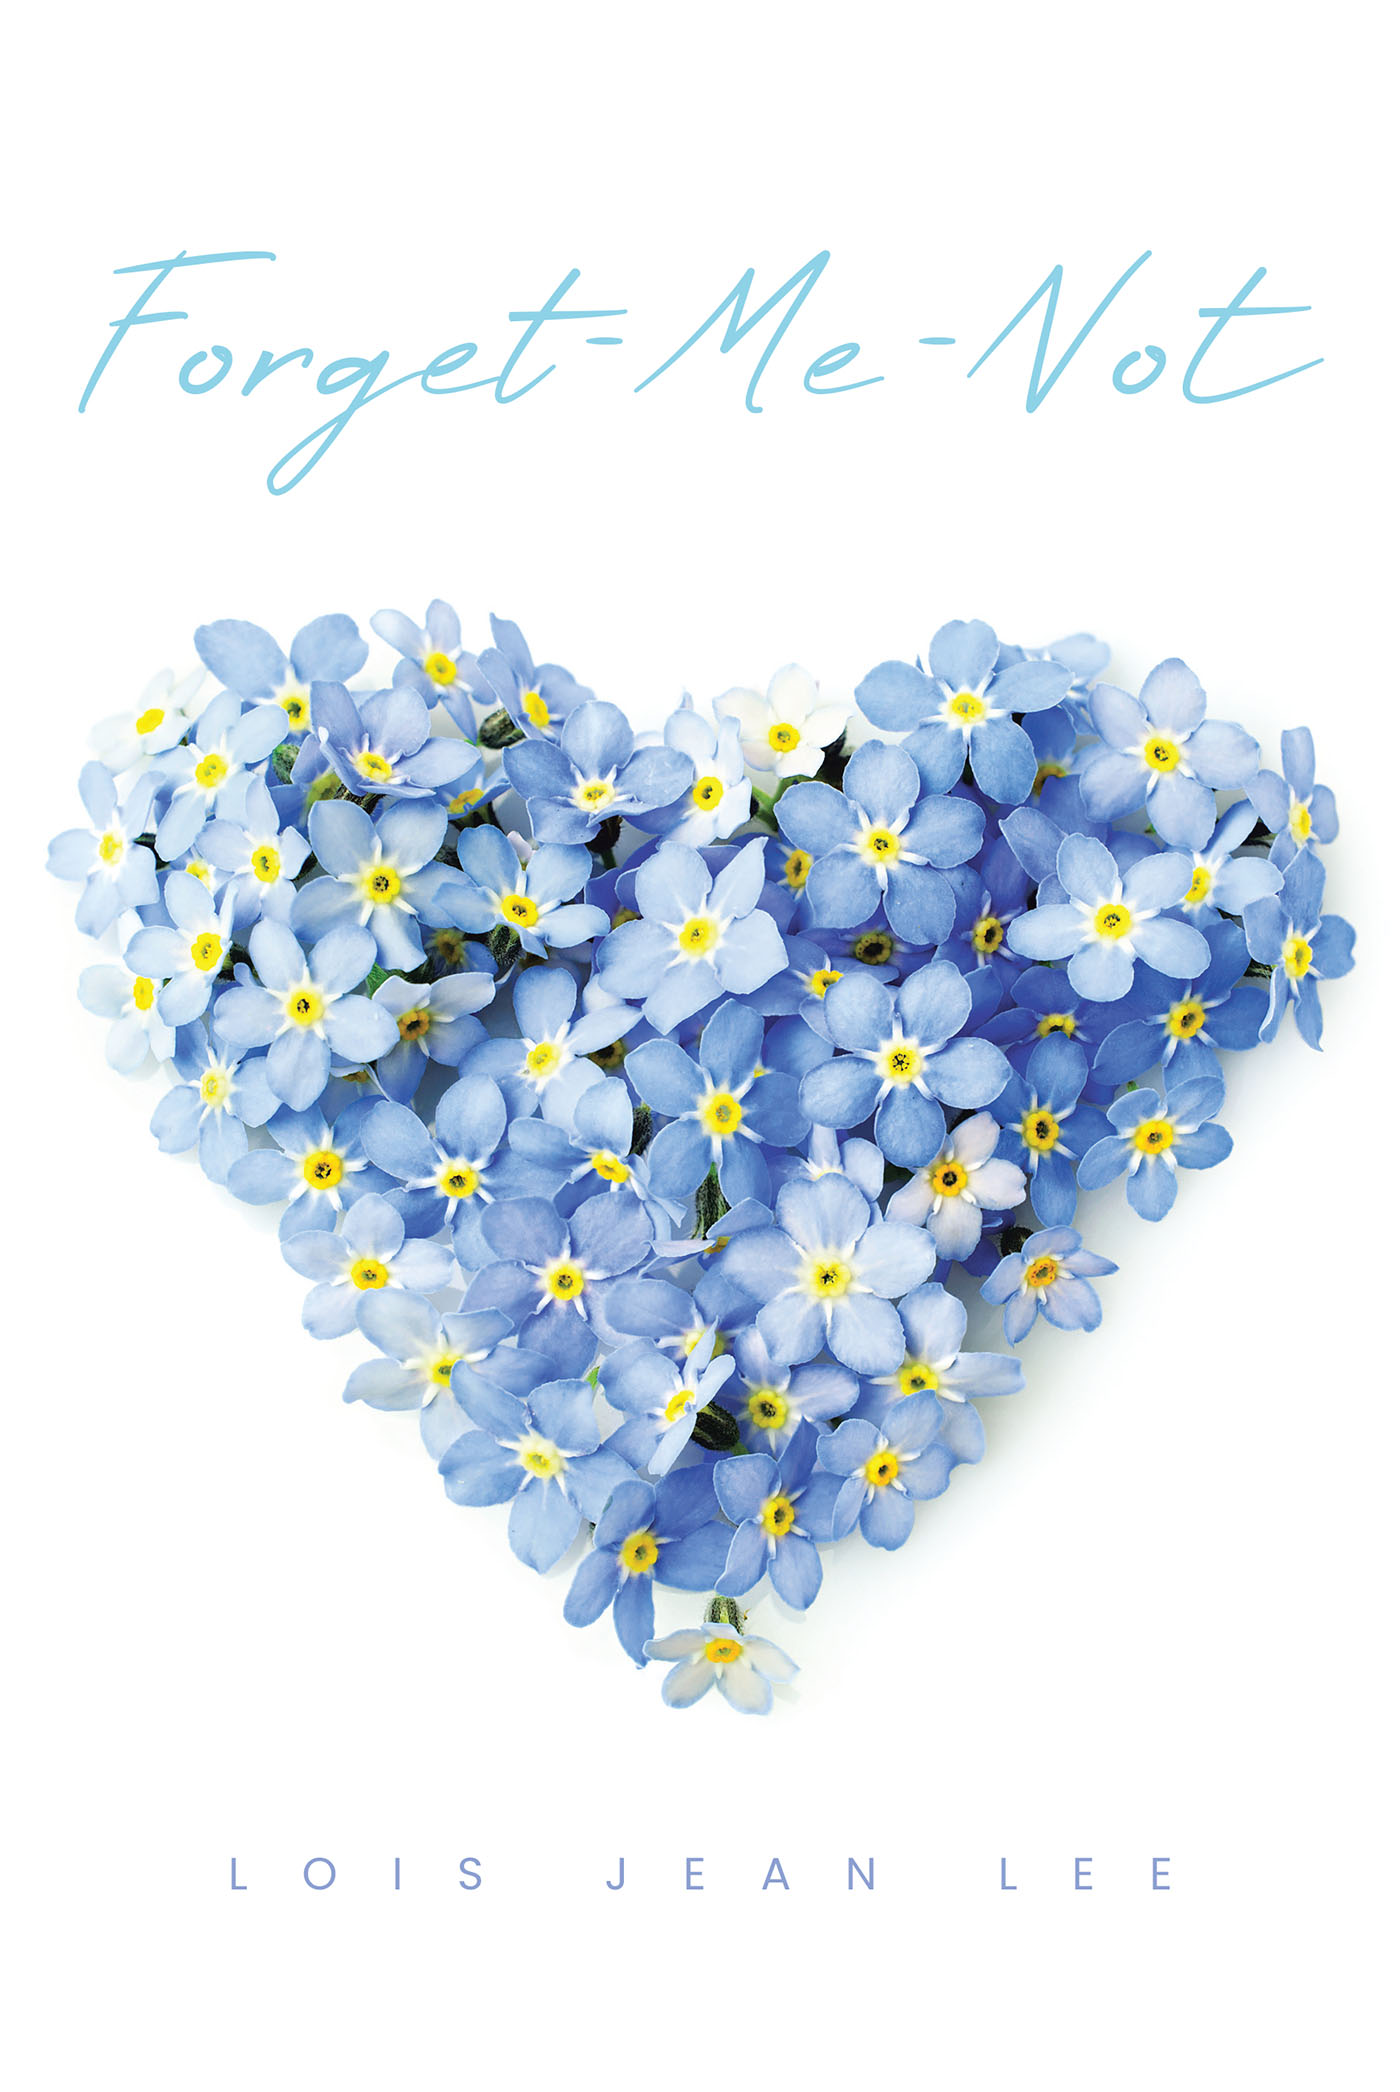 Lois Jean Lee’s Newly Released "Forget-Me Not" is an Inspirational Journey of Faith and Discovery